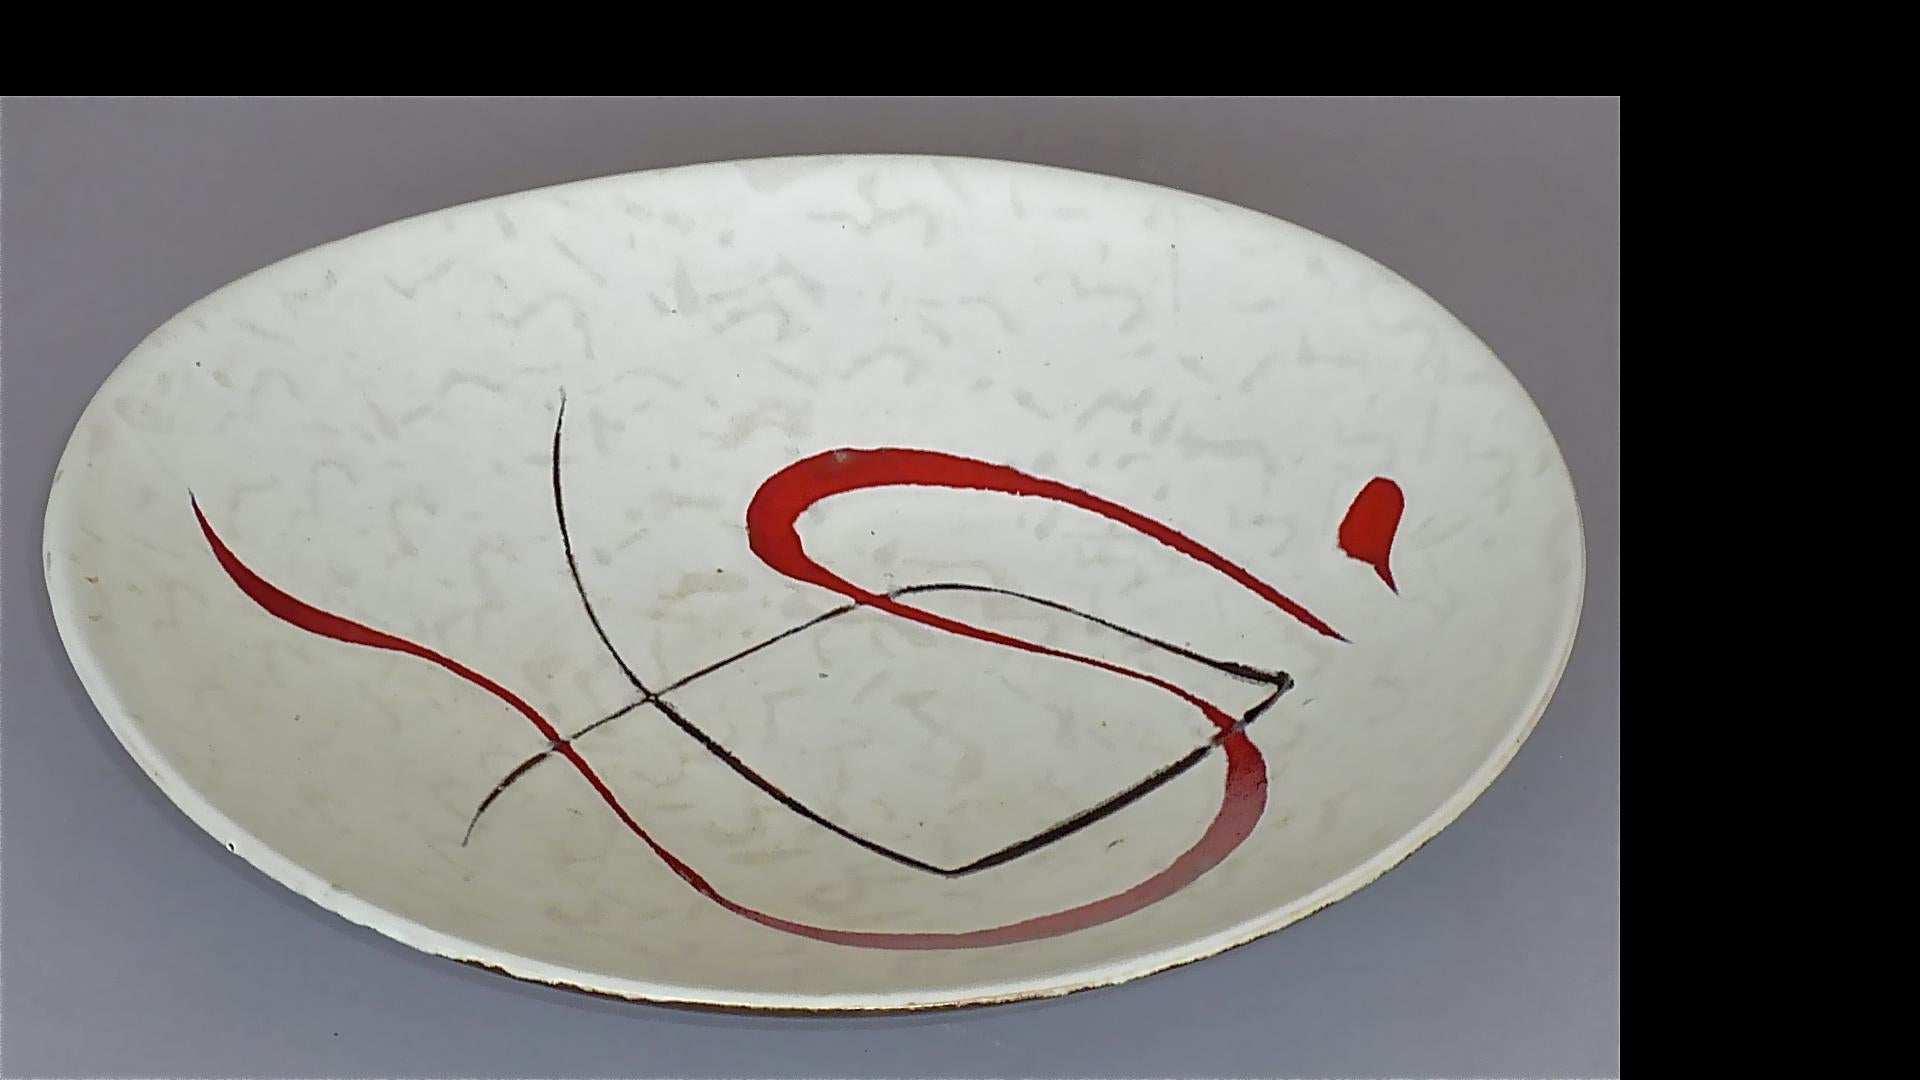 Abstract Midcentury Art Ceramic Vase and Bowl Gambone Miro Style White Red 1950s For Sale 10